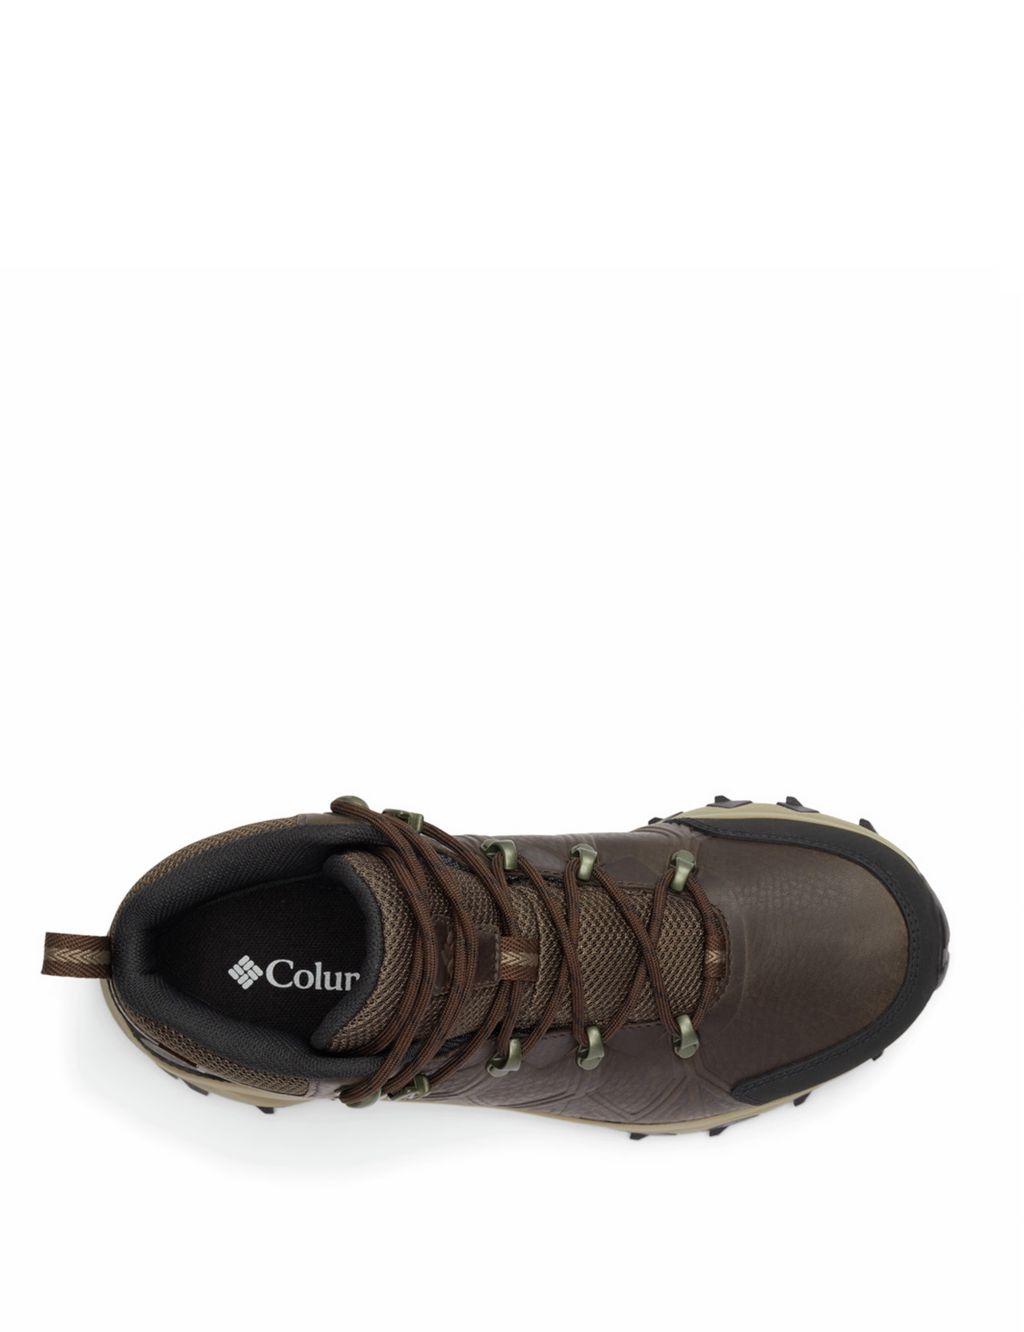 Peakfreak II Mid Outdry Leather Shoes image 5